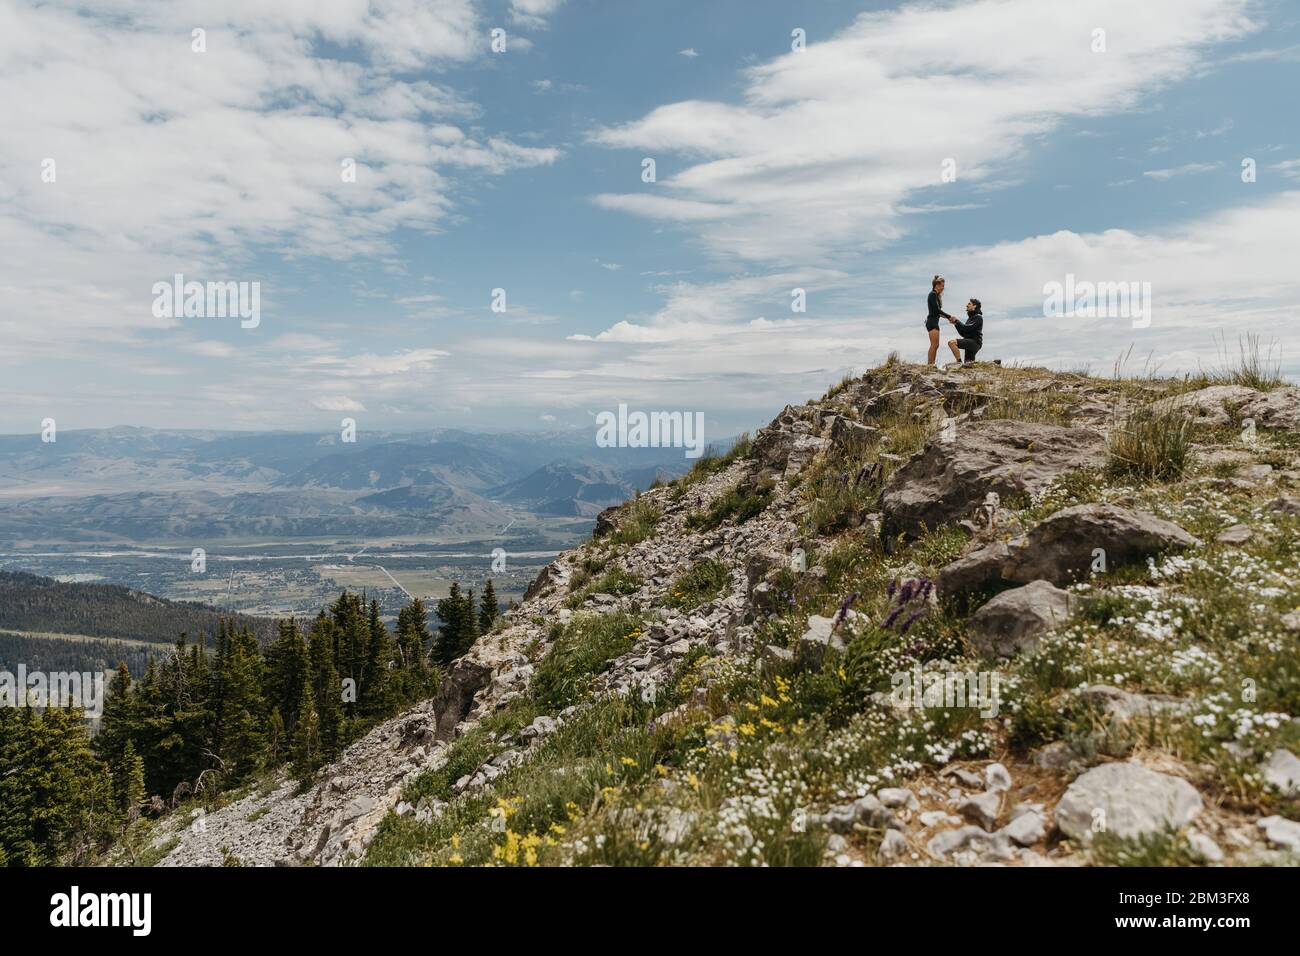 boyfriend gets down on one knee and proposes on mountain in wyoming Stock Photo